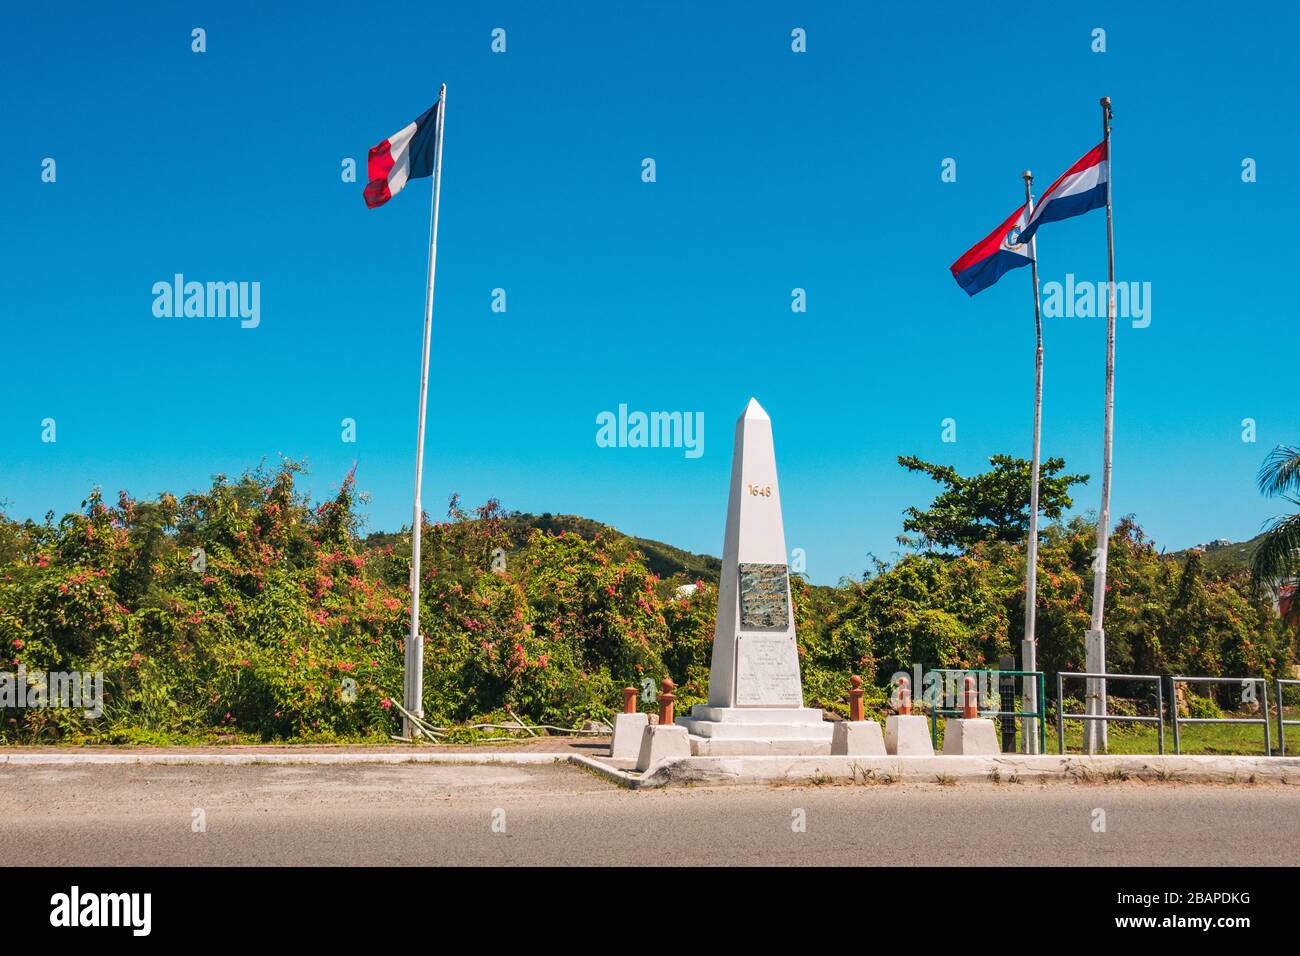 Flags fly at the Monument to Unity and Friendship at the border between the French and Dutch sides of the Caribbean island of St. Martin / St. Maarten Stock Photo